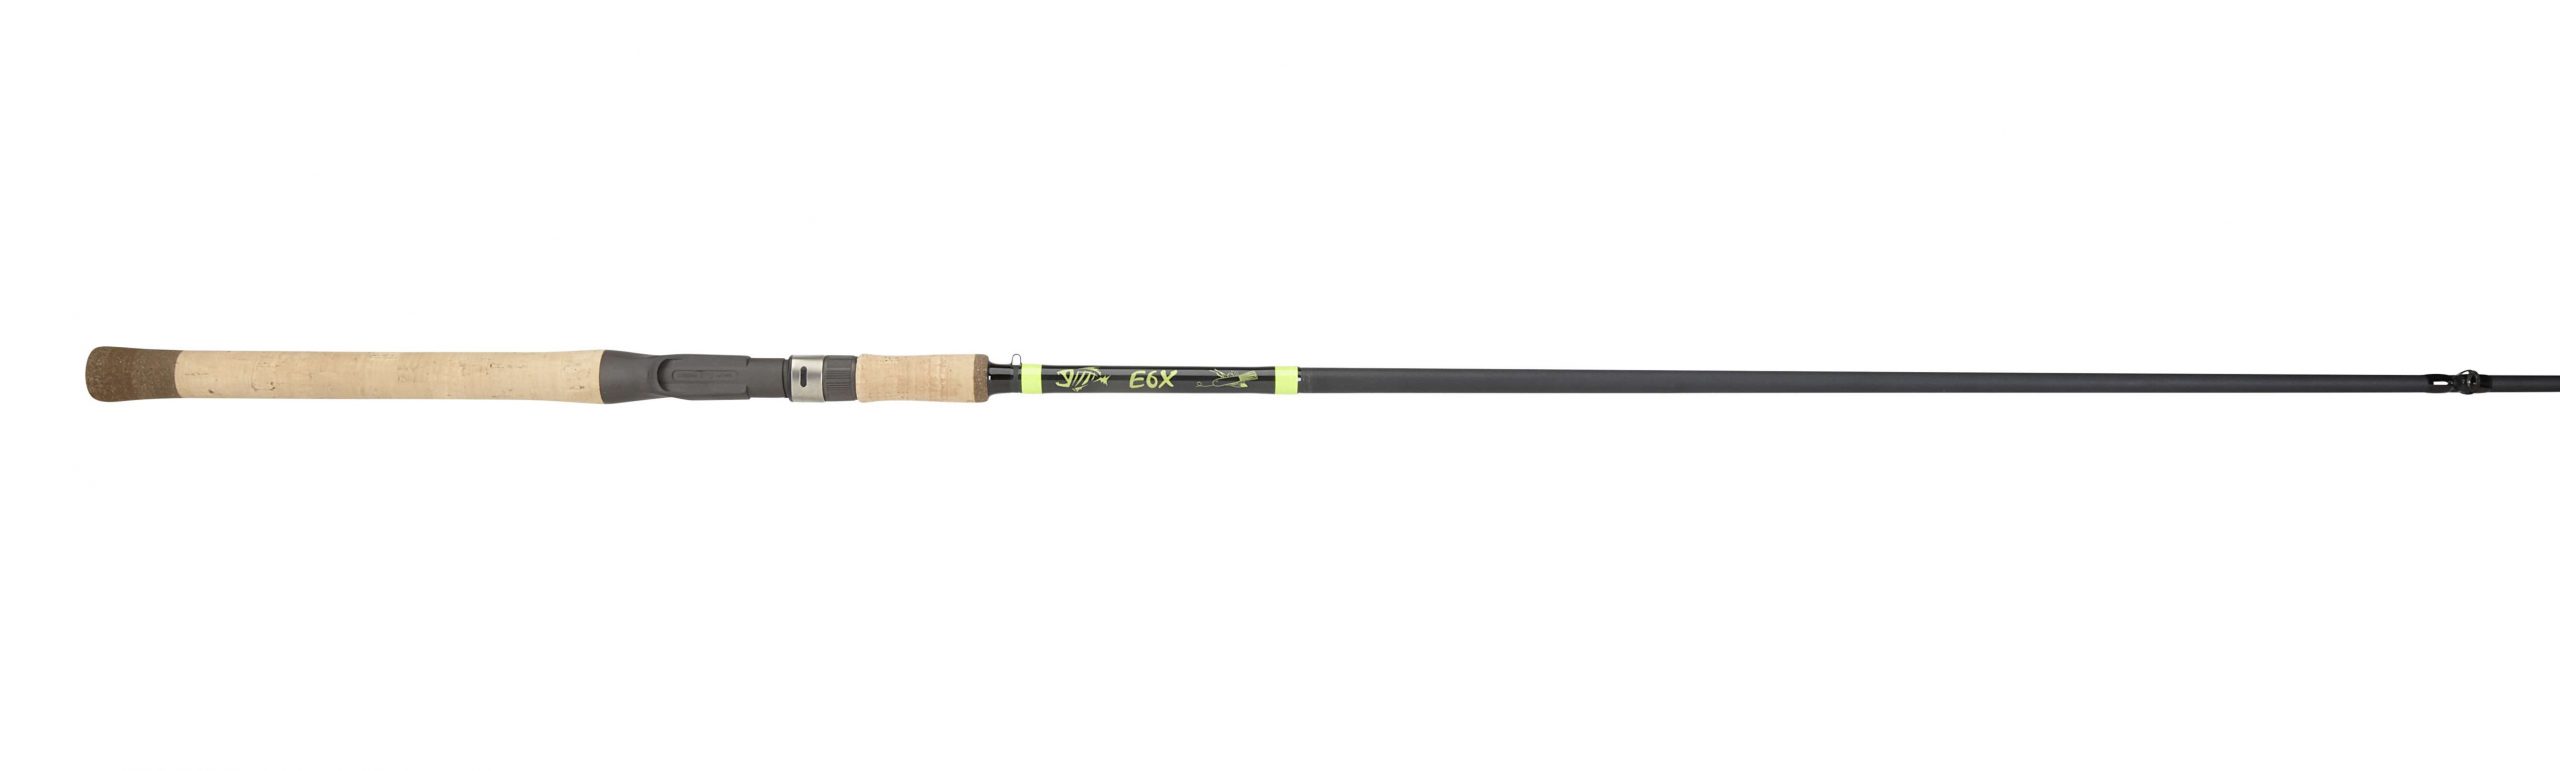 <p><b>G.LOOMIS E6X ROD SERIES</b> 
This new rod series featuring a Multi-Taper technology will allow all bass anglers to experience G.Loomis. Until now, this brand has lived at the upper end of the price spectrum for rods. The new E6X series will start at $179.99 and still feature the performance platform the company is known for: weight, balance, sensitivity and action.</p>
